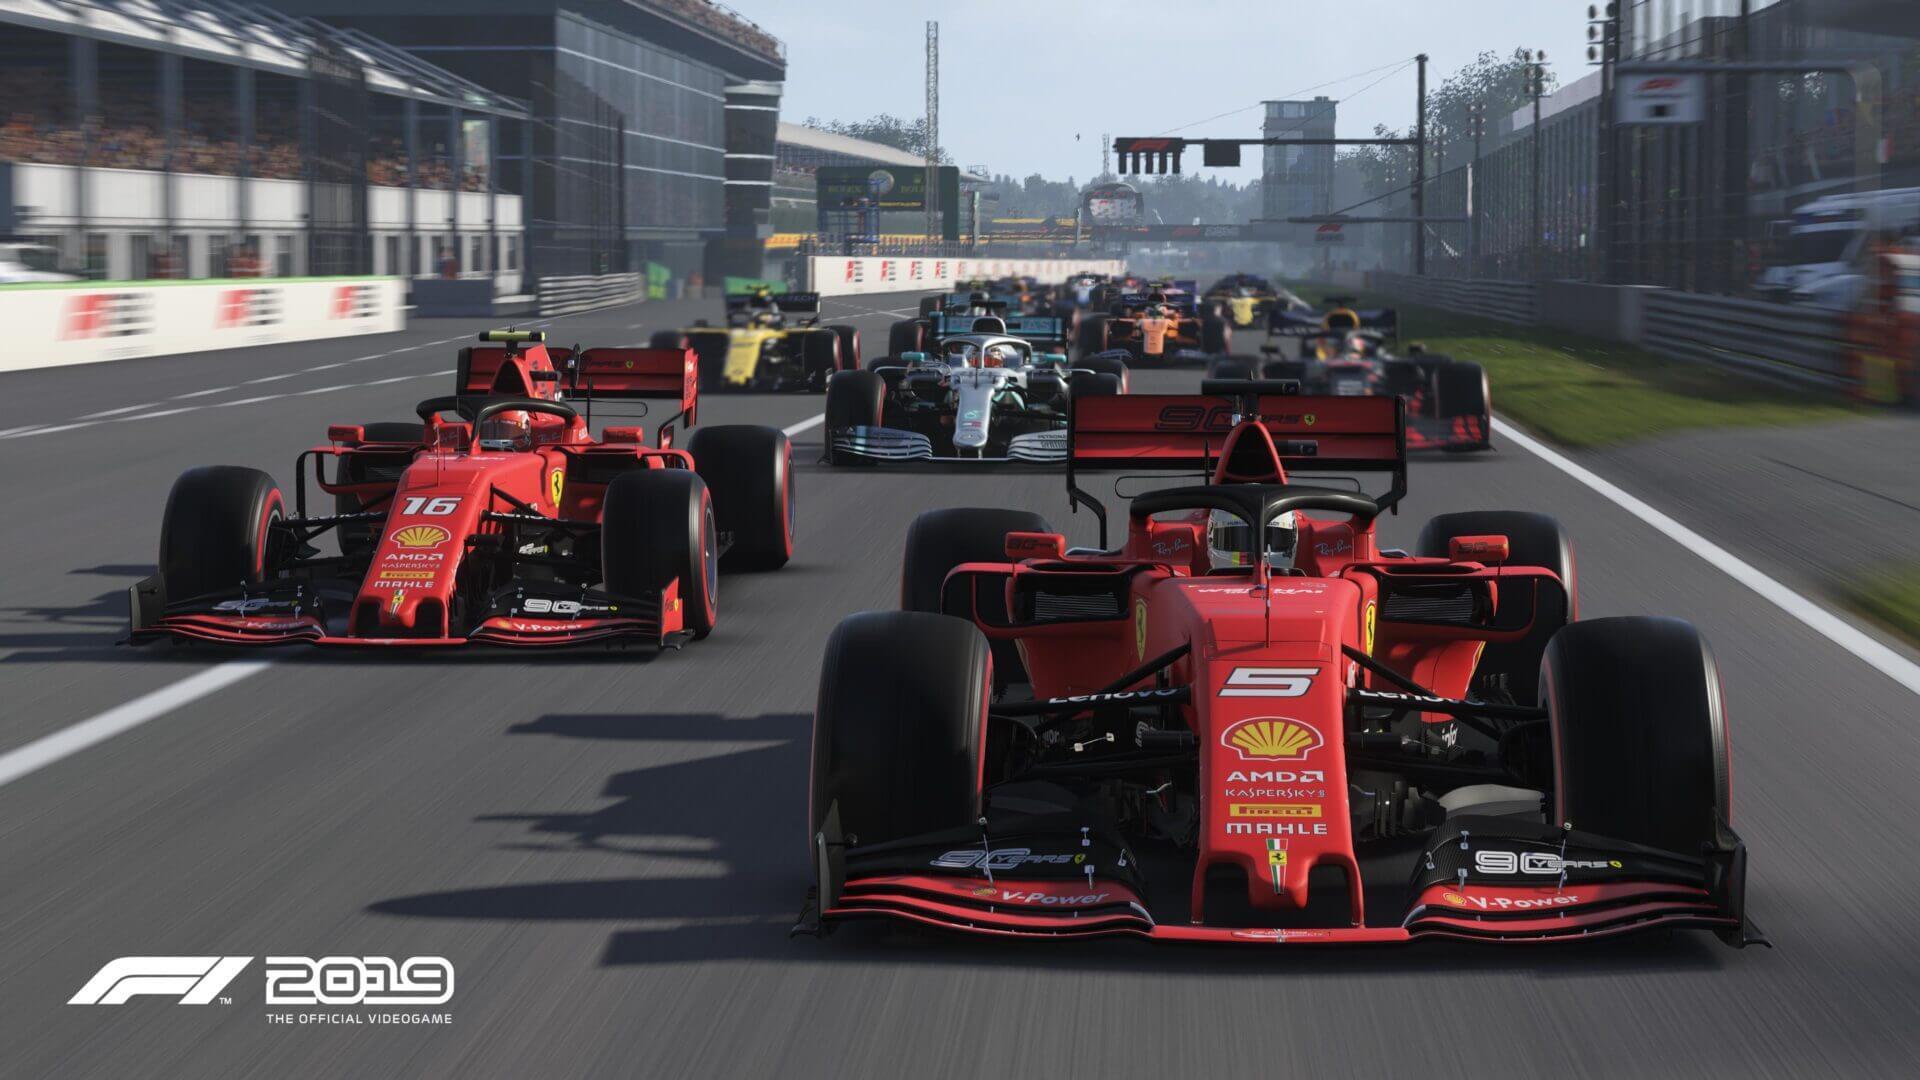 F1 2019 Free Trial Now Available on PC, PS4 and XB1, Play Until March 18